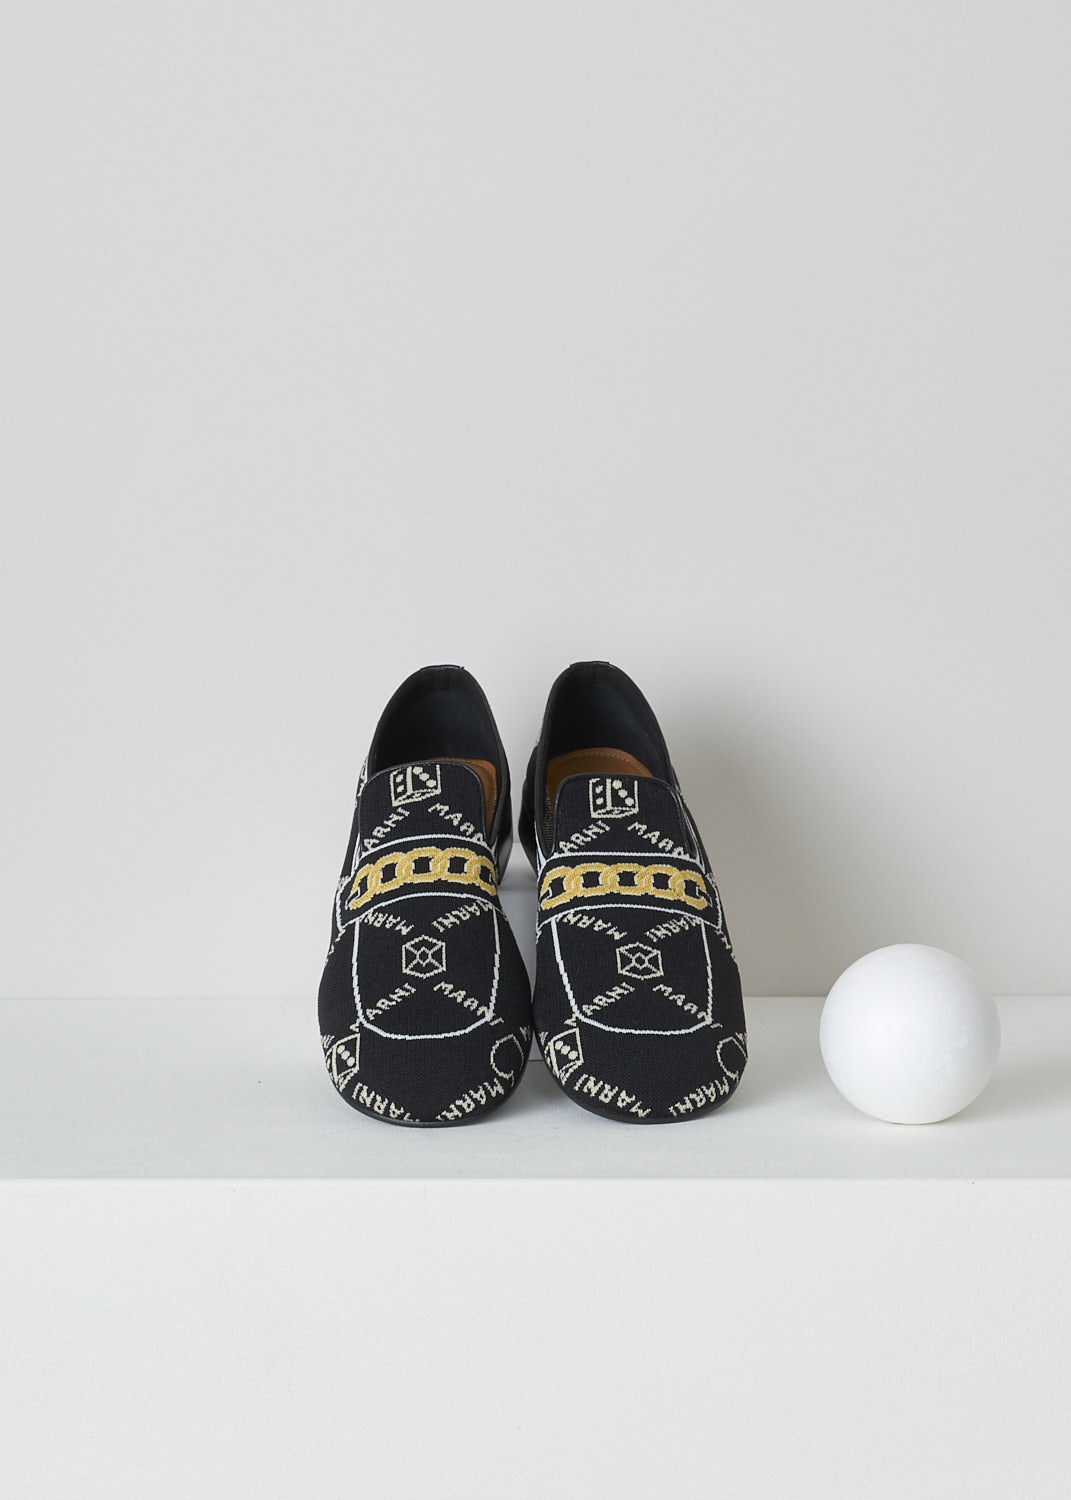 MARNI, BLACK TROMPE L'OEIL JACQUARD MOCCASINS, MOMS003601_P4601_Z2Q23, Black, Top, These black knitted moccasins have a trompe l'oeil image woven into them which depicts a gold chain across the vamp. The brand's logo is woven into them throughout the shoe in white. These moccasins have a round toe and flat rubber sole with a small heel. 
